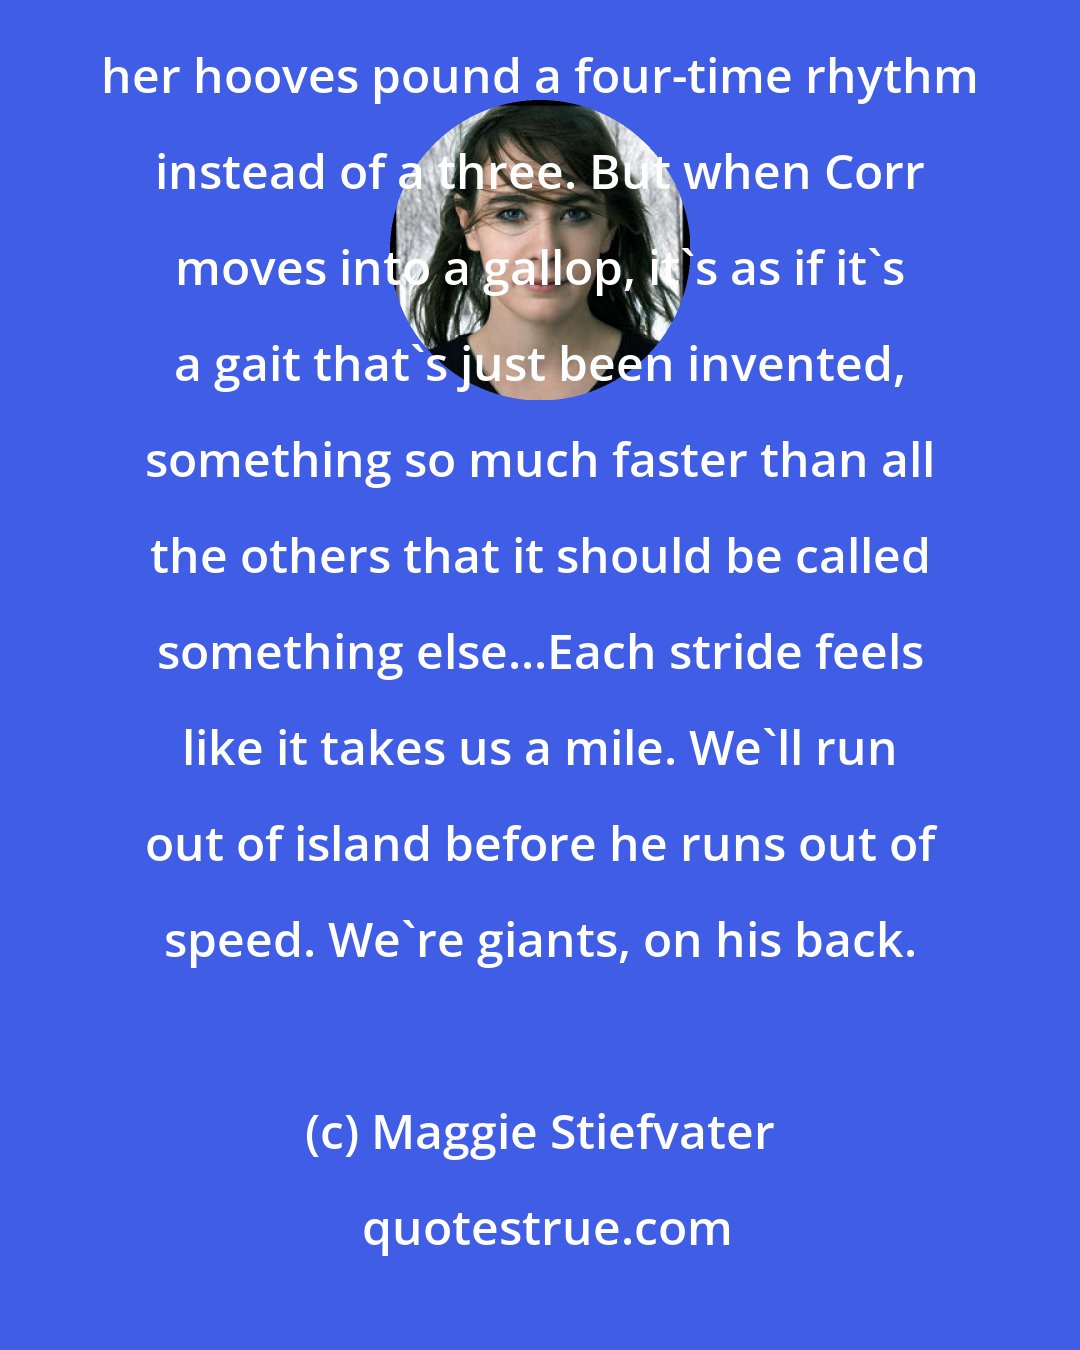 Maggie Stiefvater: When Dove moves up from a canter to a gallop, sometimes the only way I can tell the difference is because her hooves pound a four-time rhythm instead of a three. But when Corr moves into a gallop, it's as if it's a gait that's just been invented, something so much faster than all the others that it should be called something else...Each stride feels like it takes us a mile. We'll run out of island before he runs out of speed. We're giants, on his back.